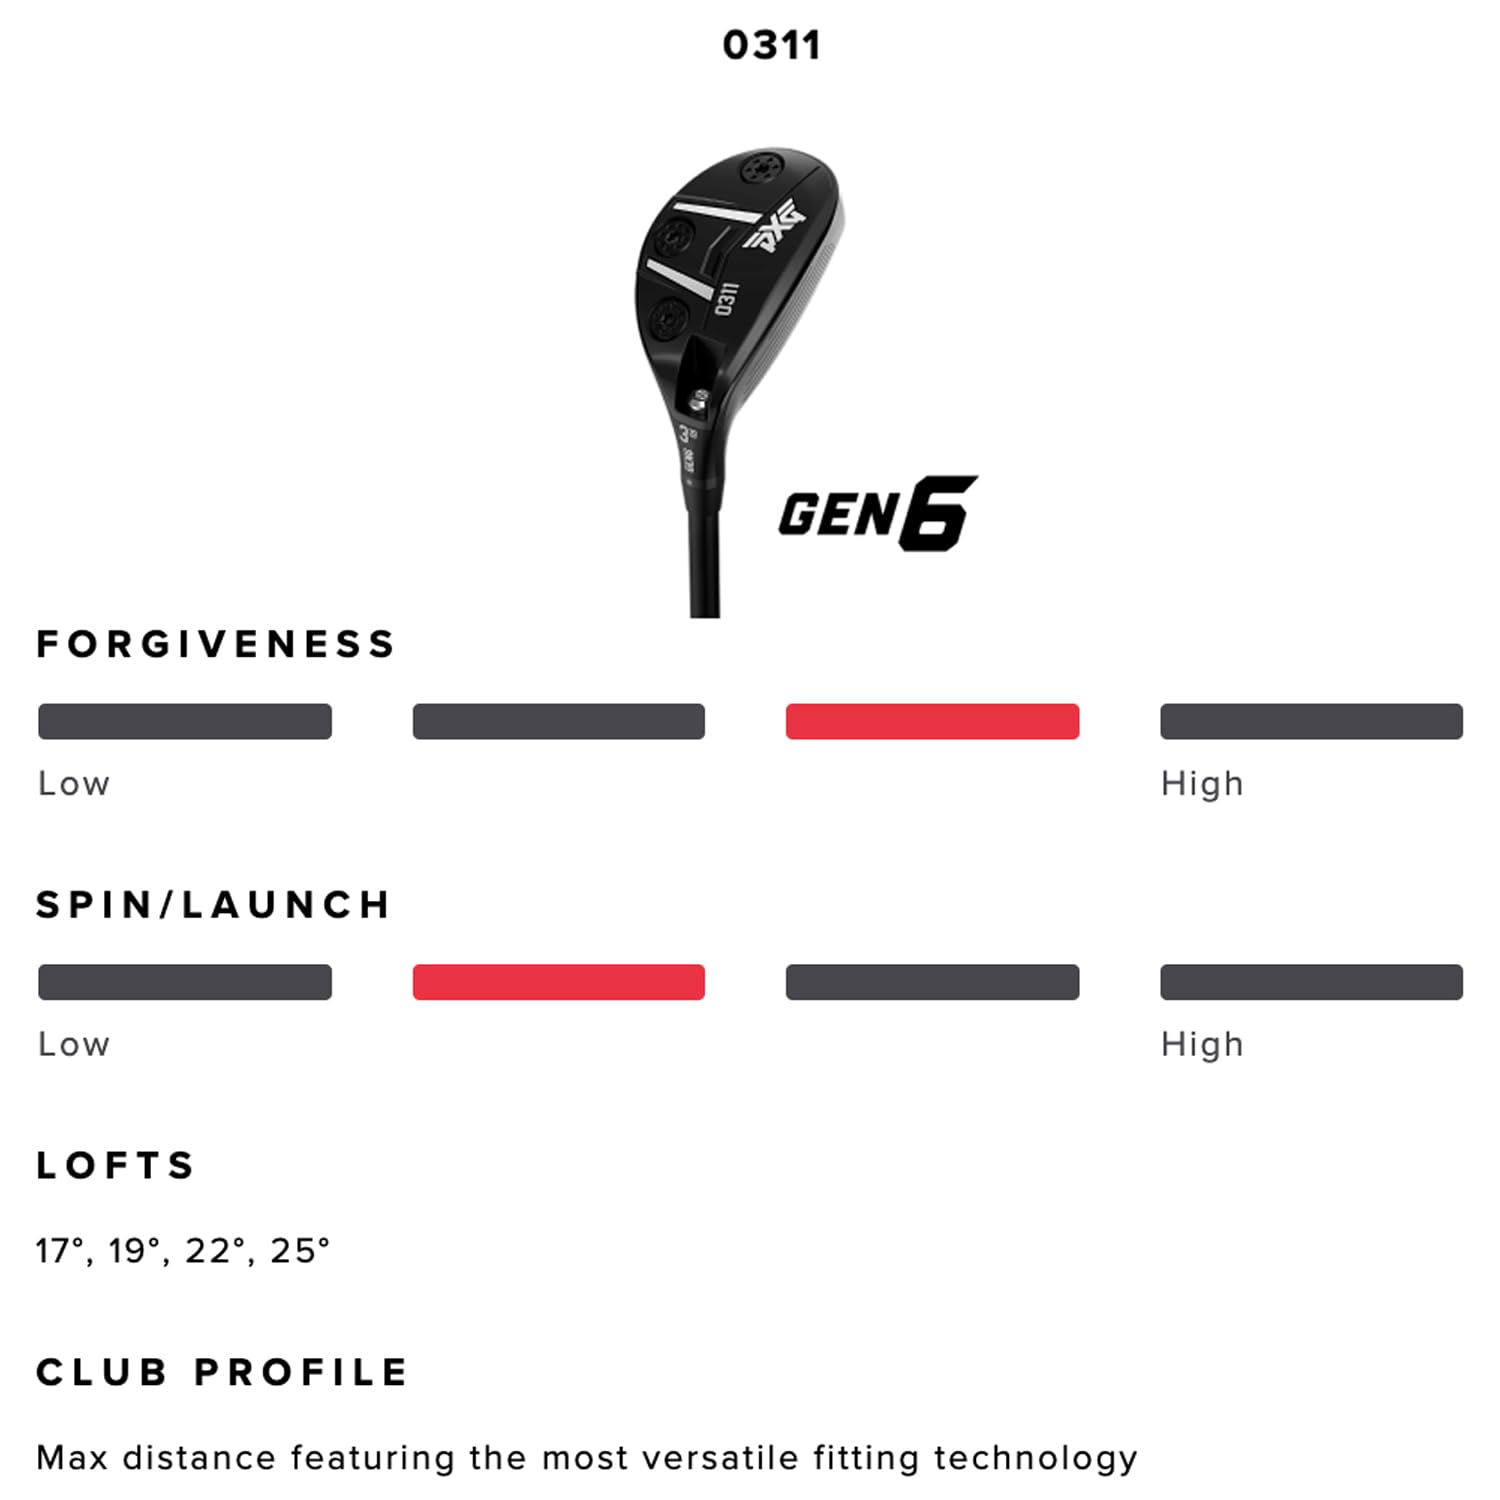 PXG Hybrid Golf Club - 0311 GEN6 Right Handed Hybrid Club in 19, 22, or 25 Degree Lofts with Adjustable Loft and Lie Hosel Available in Stiff, Regular, or Senior Flex Graphite Shaft